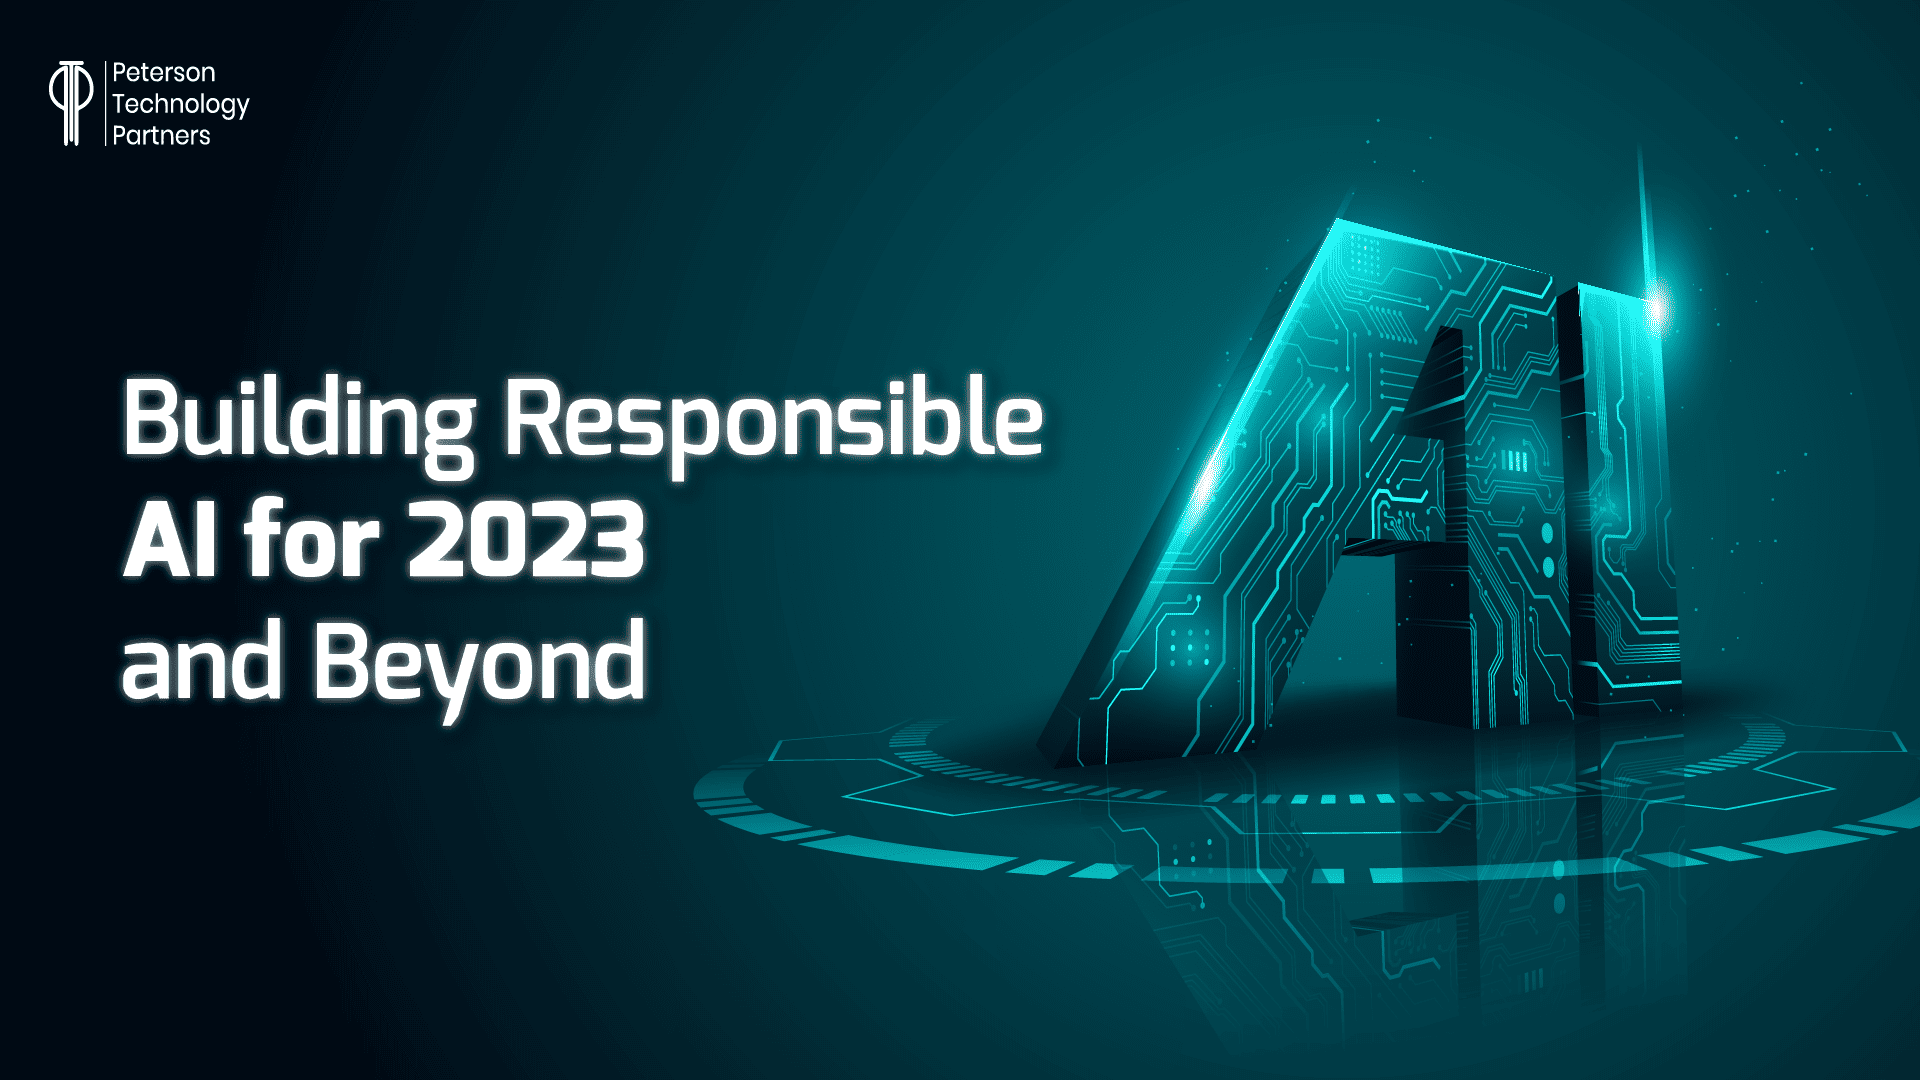 Building Responsible AI for 2023 and Beyond